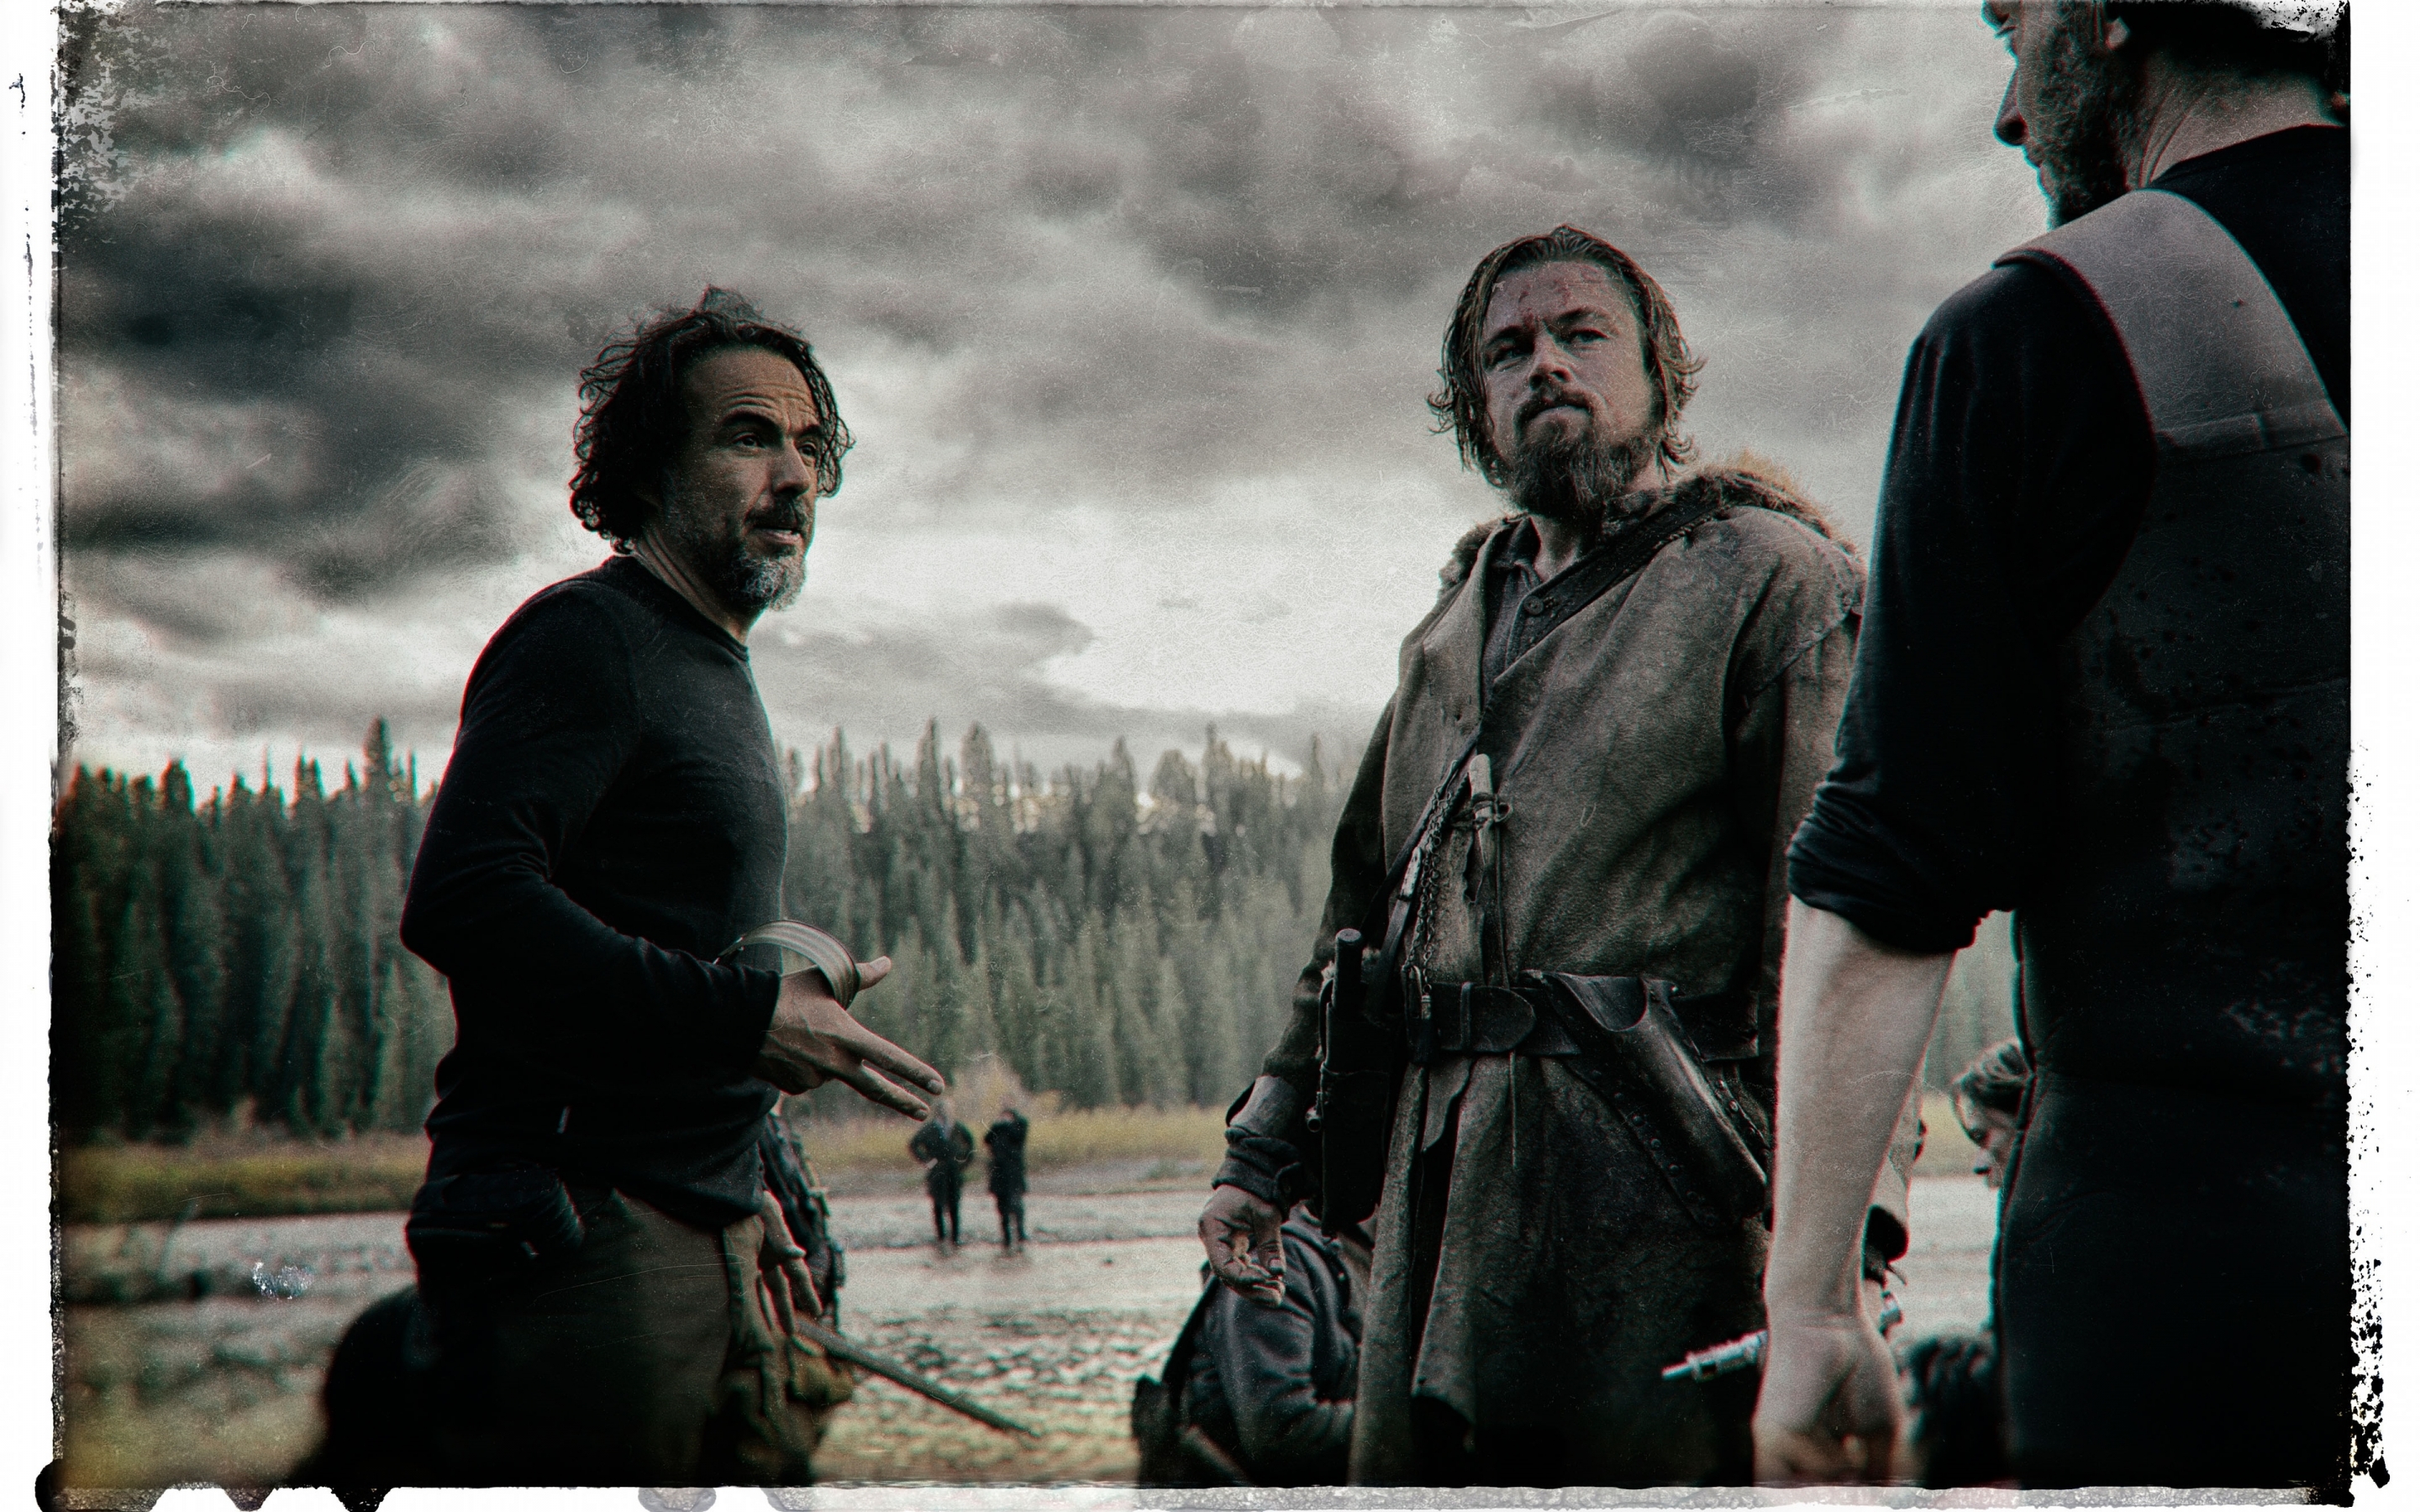 The Revenant Cast for 2880 x 1800 Retina Display resolution